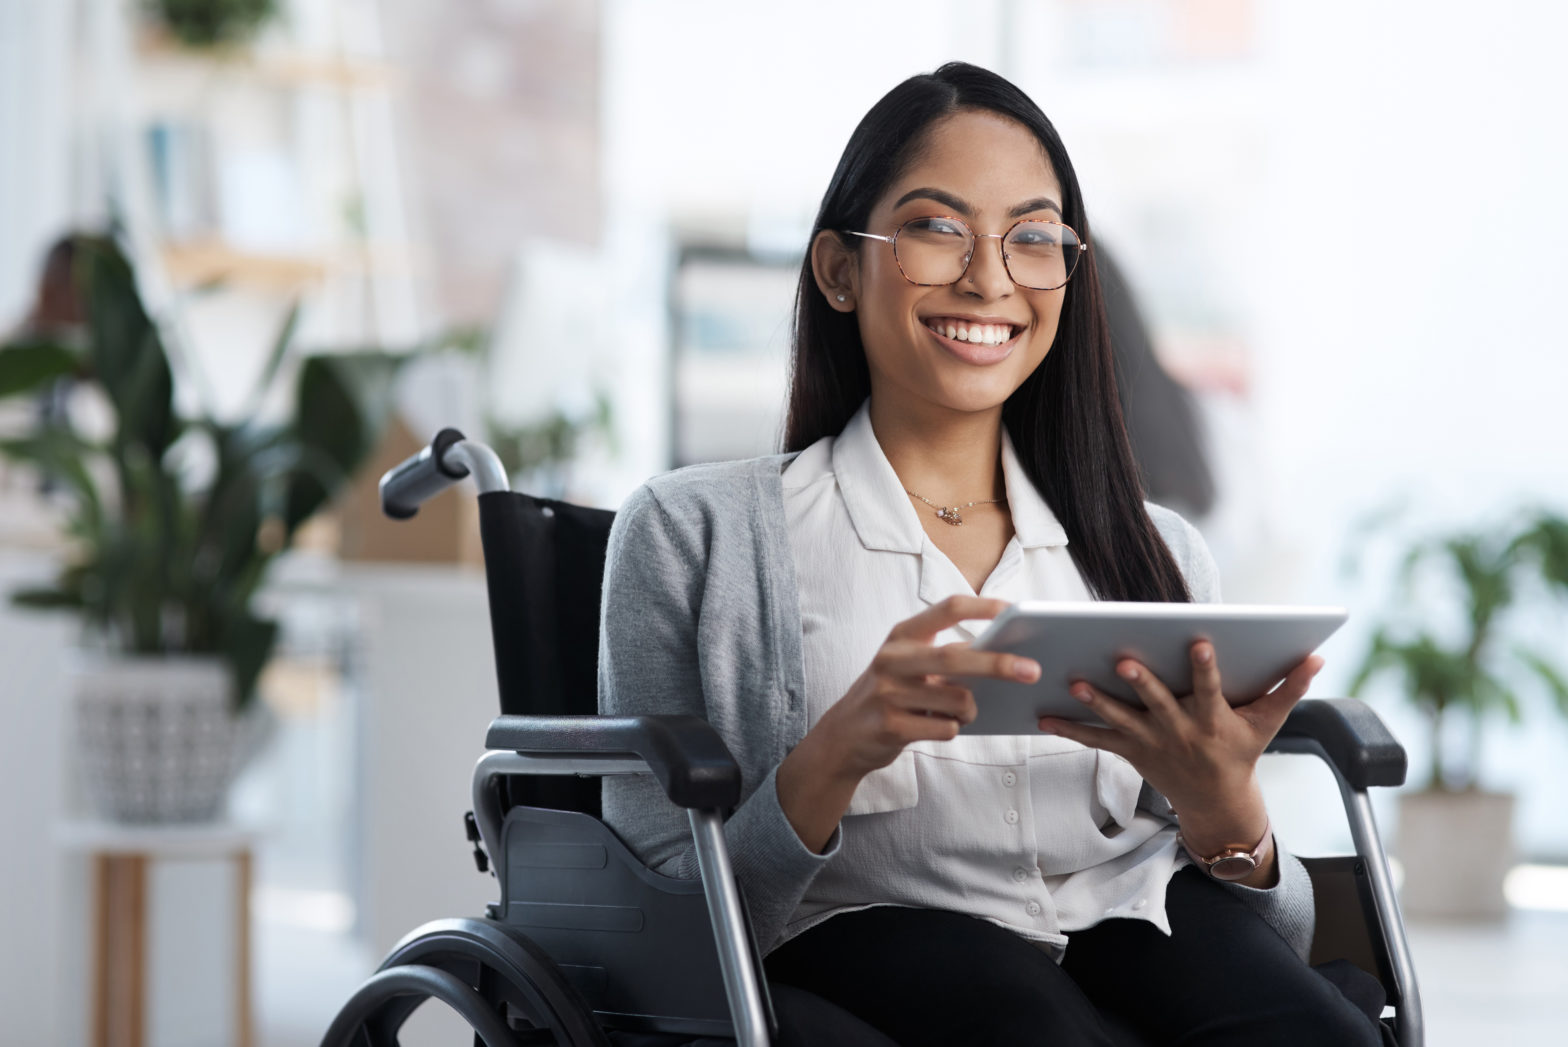 A photo of a smiling young woman holding an ipad and using a wheelchair